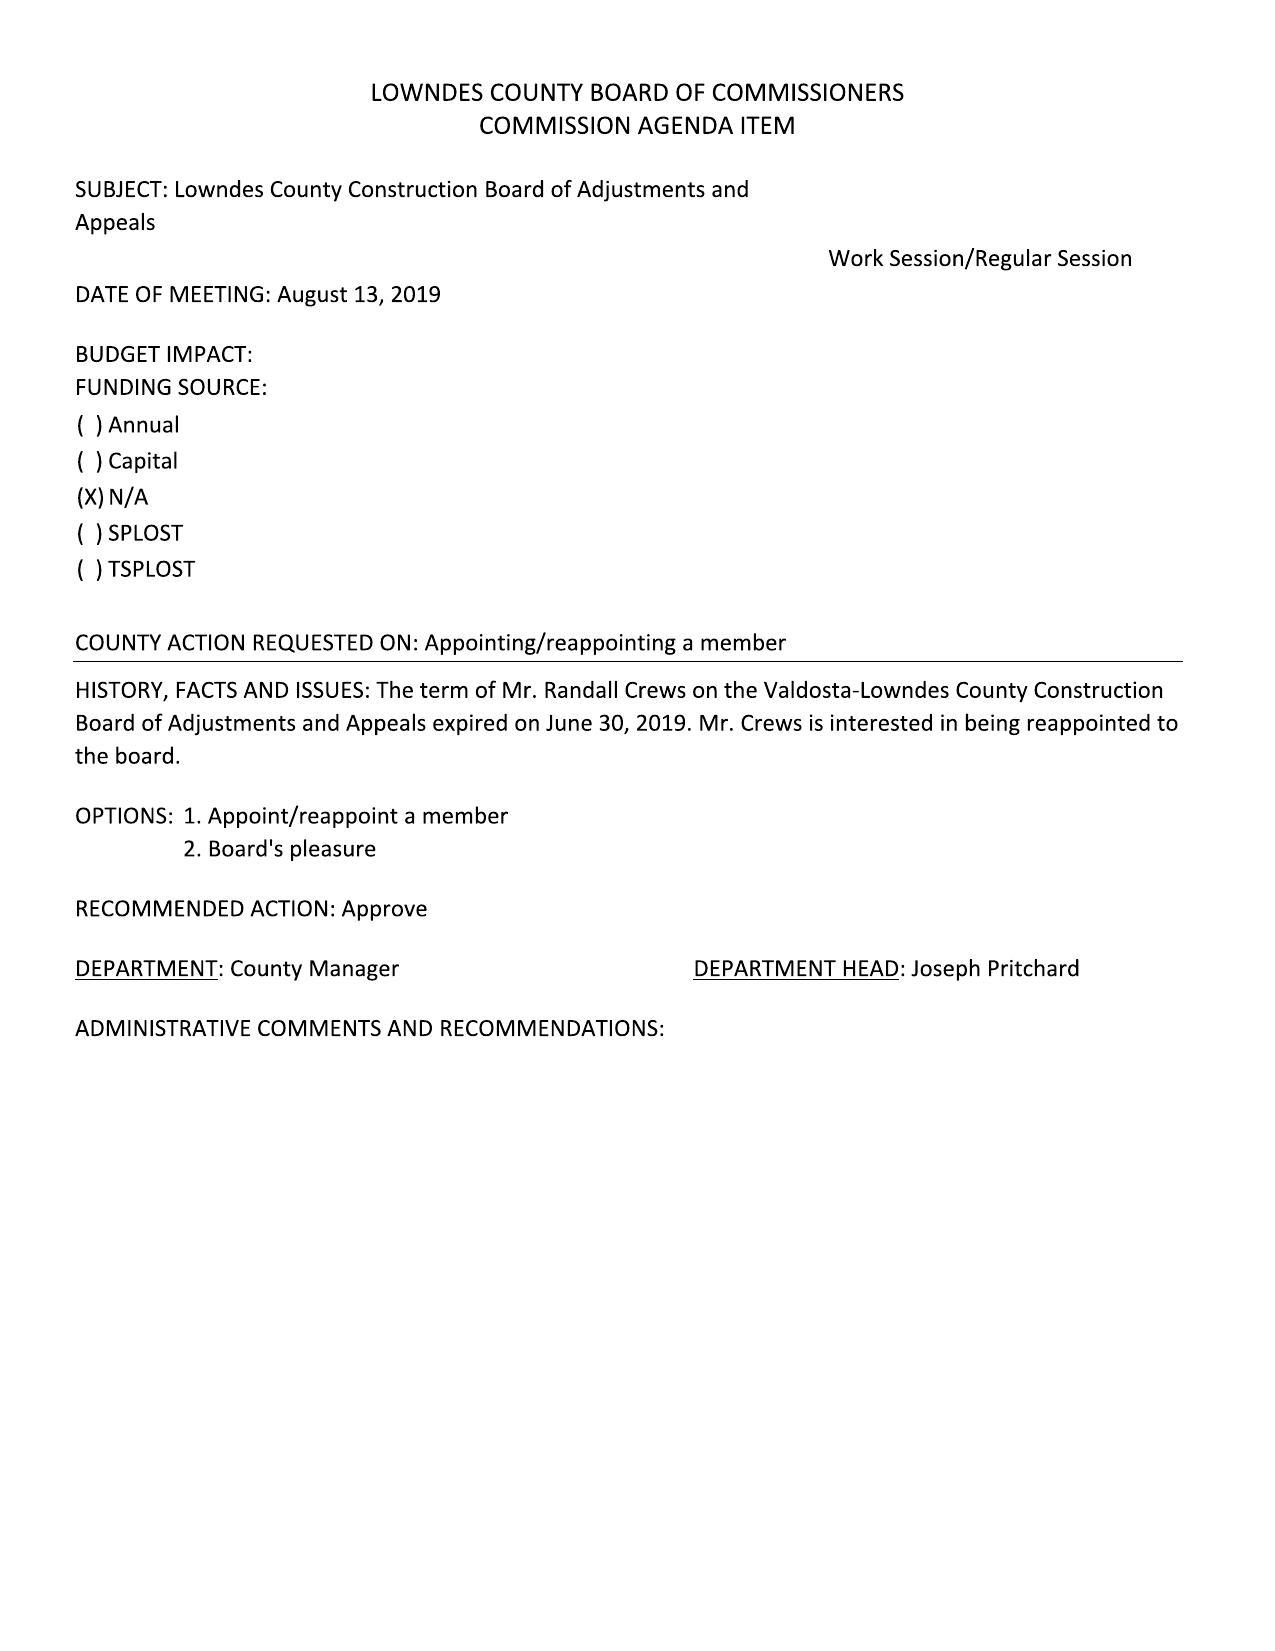 Lowndes County Construction Board of Adjustments and Appeals